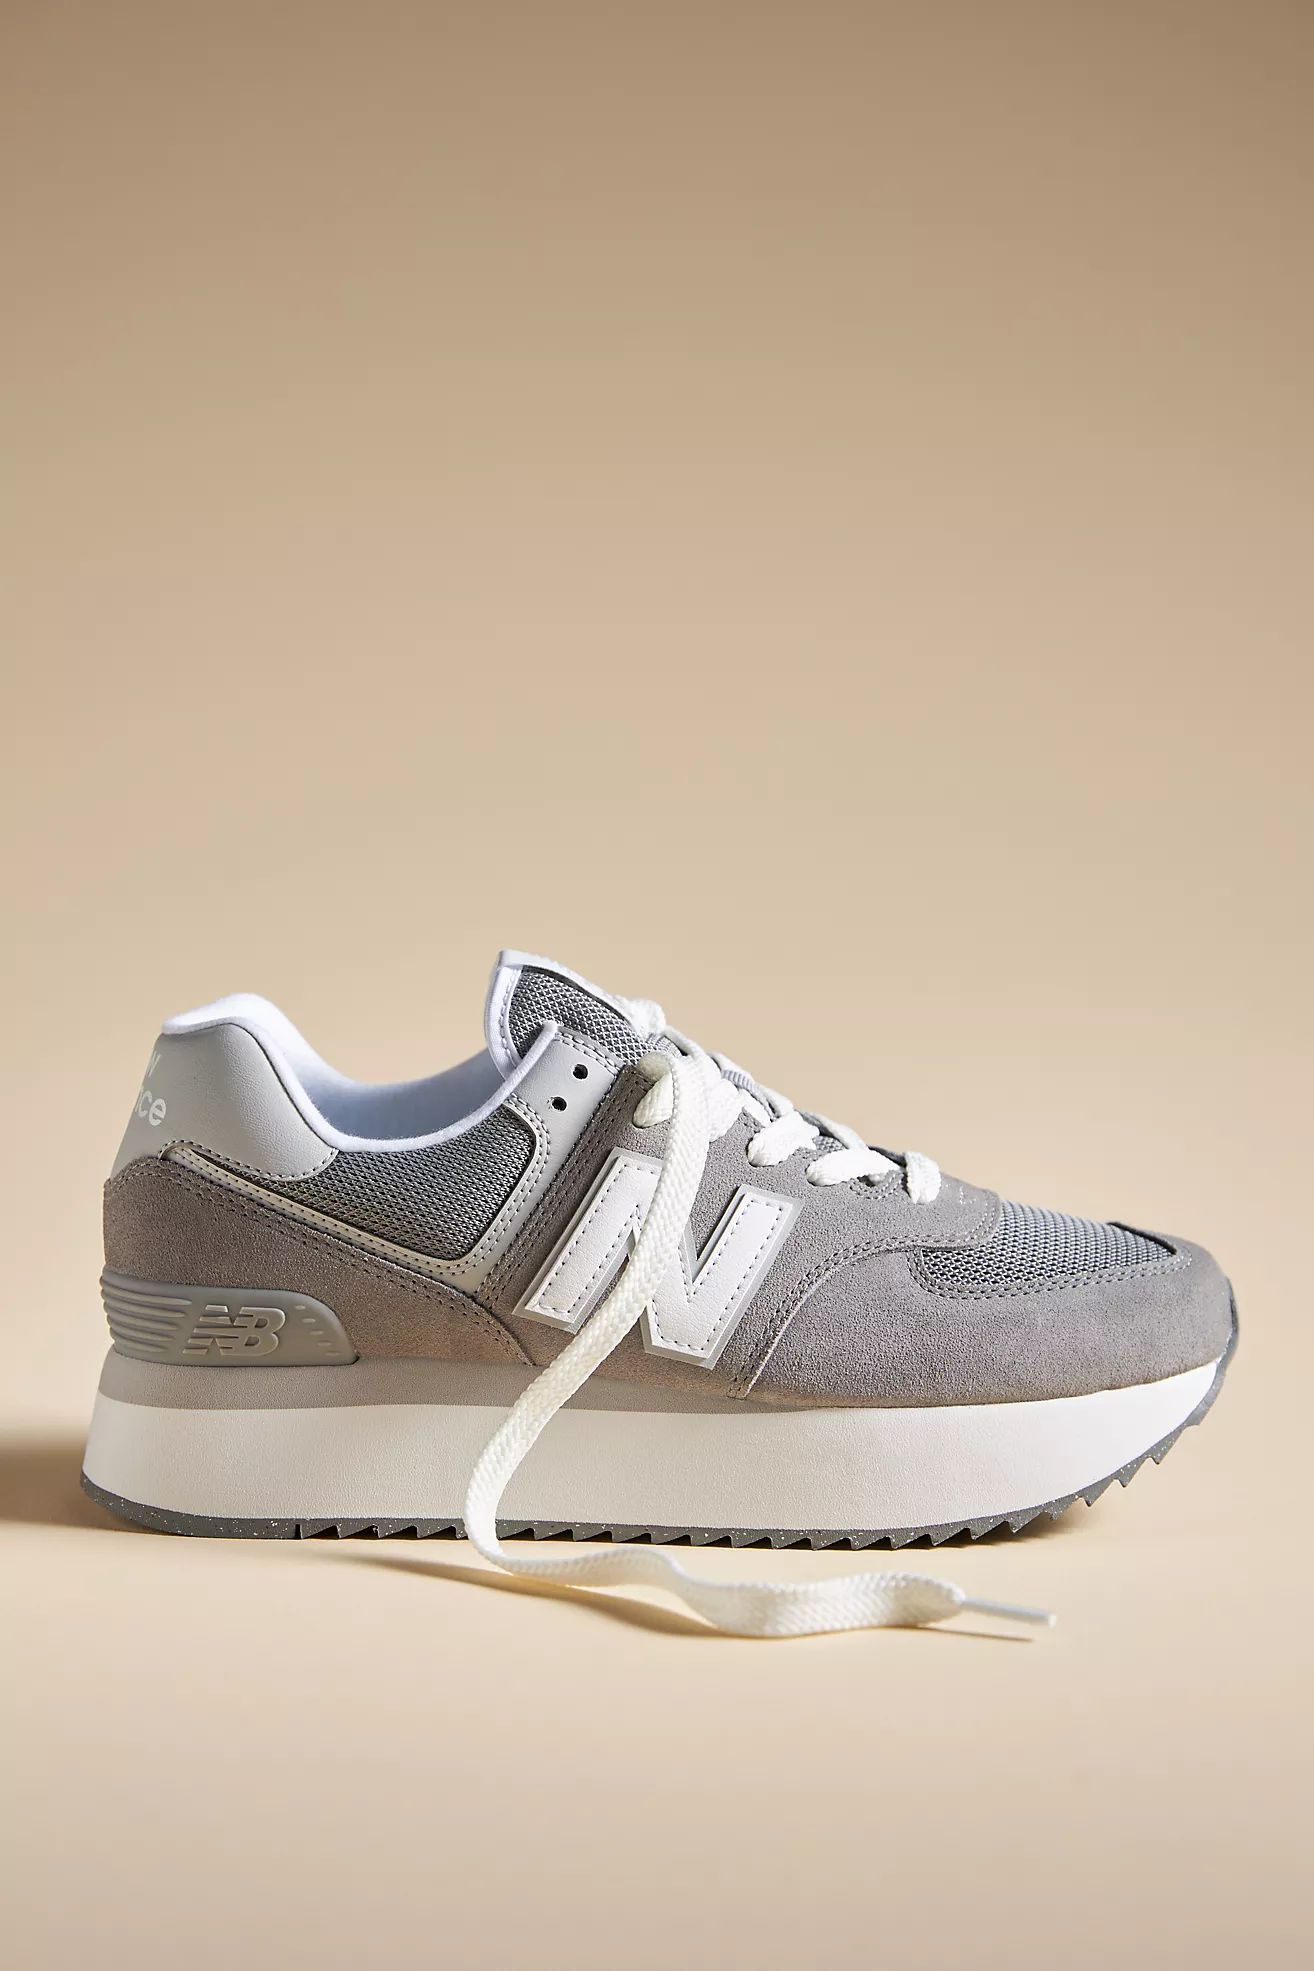 New Balance 574+ Sneakers | Anthropologie (US)